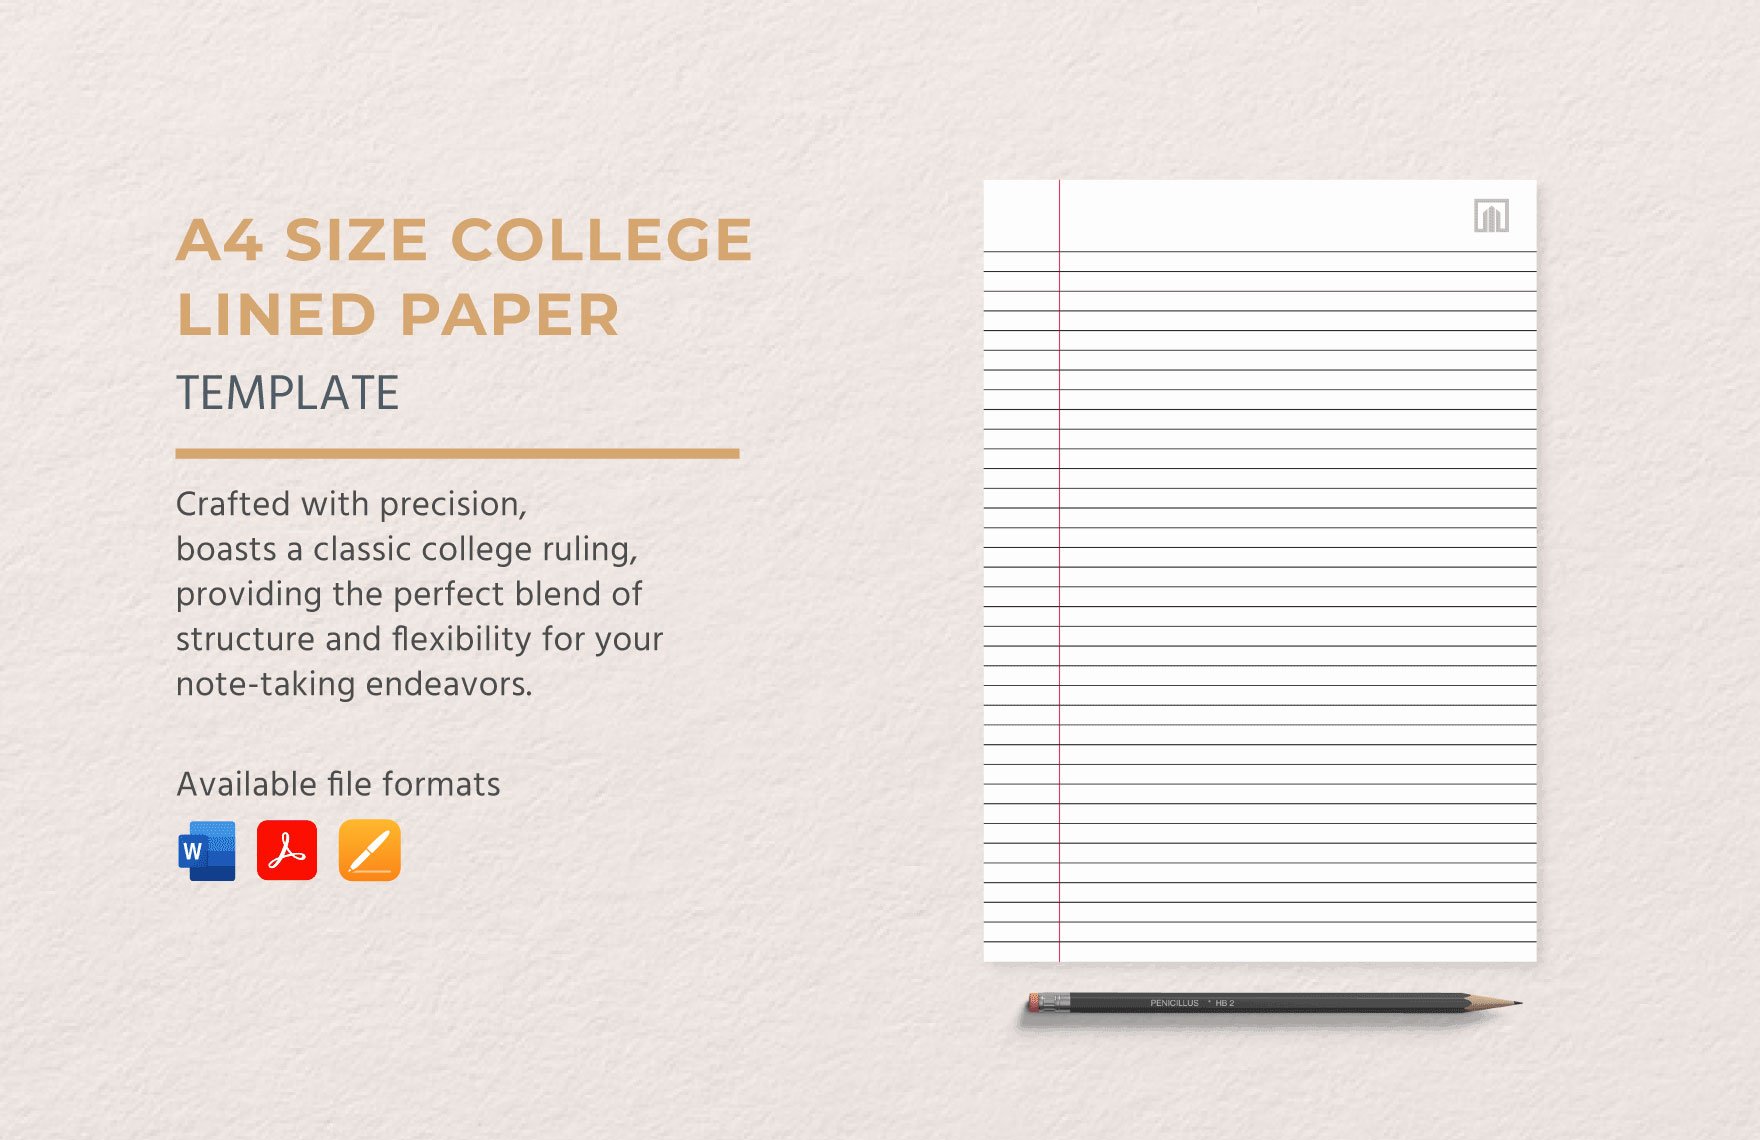 A4 Size College Lined Paper Template in Word, Google Docs, PDF, Illustrator, PSD, Apple Pages